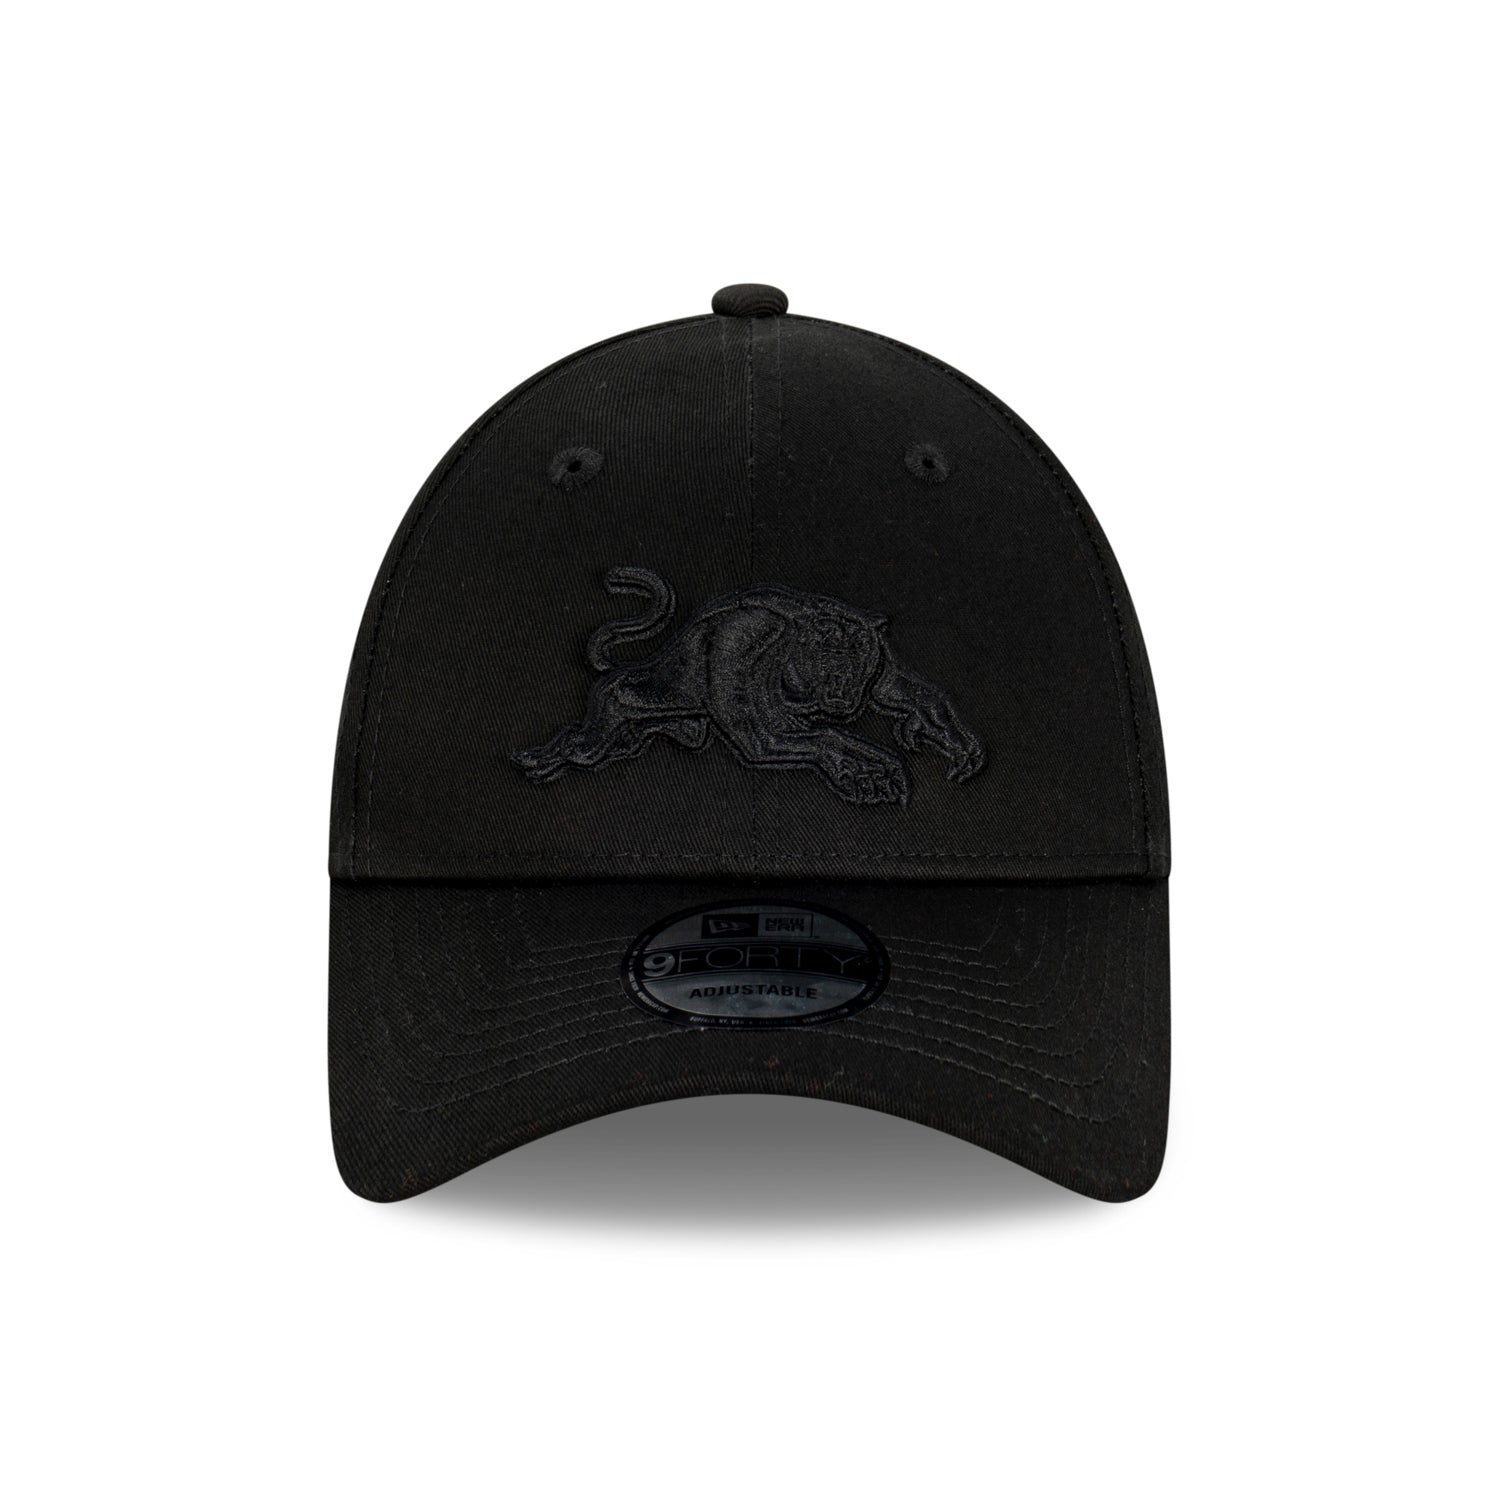 Penrith Panthers New Era 9Forty Snapback Cap